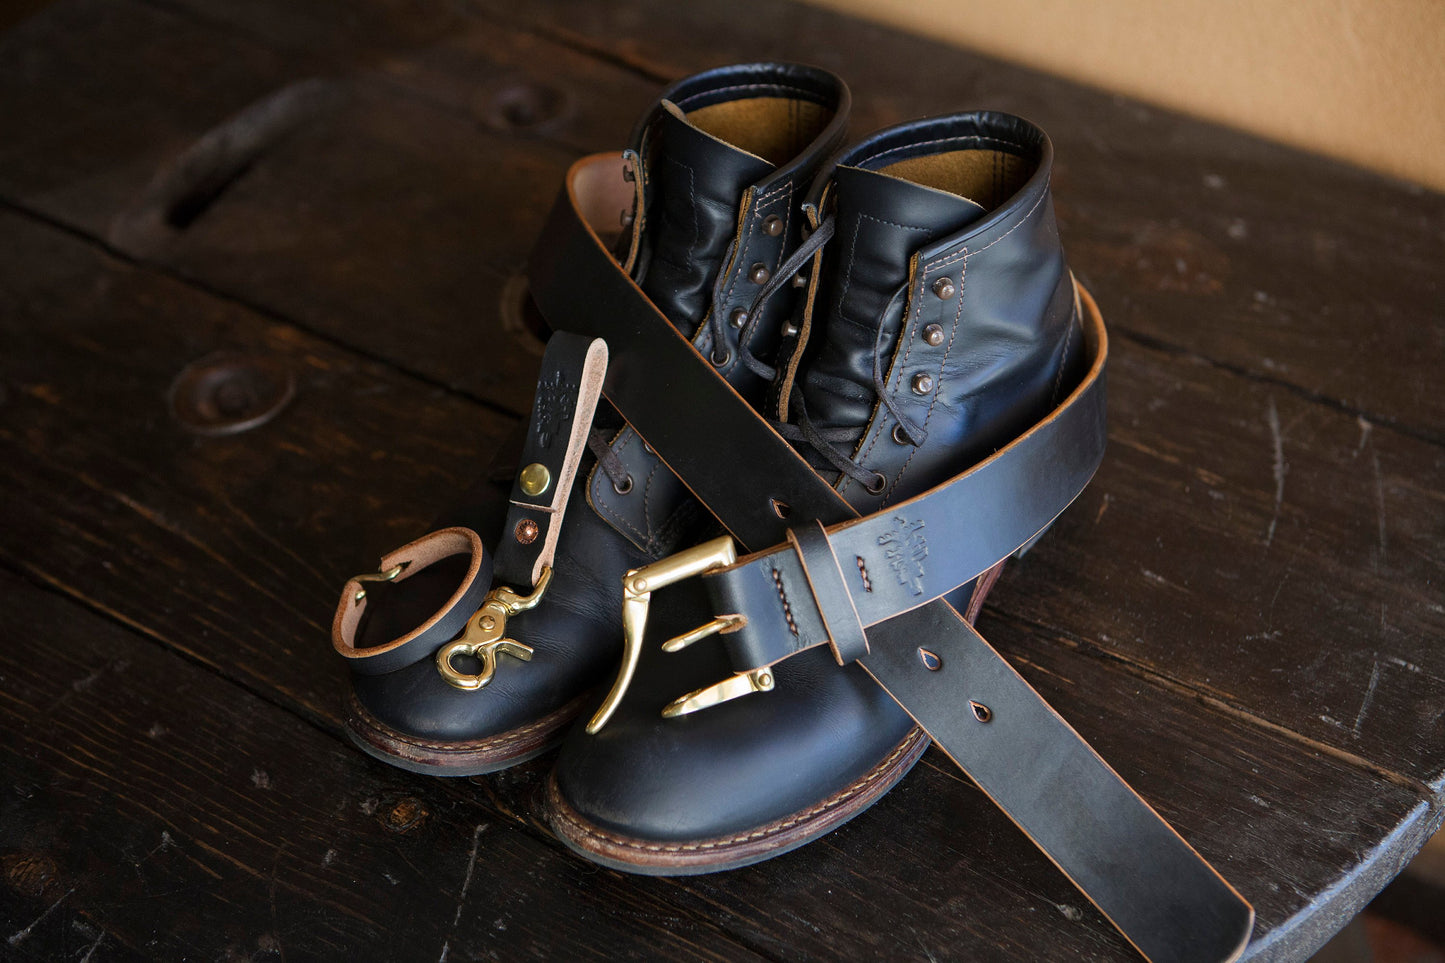 Painted Black Teacore Leather Cuff *fades to brown to pair with Red Wing Klondike Leather*